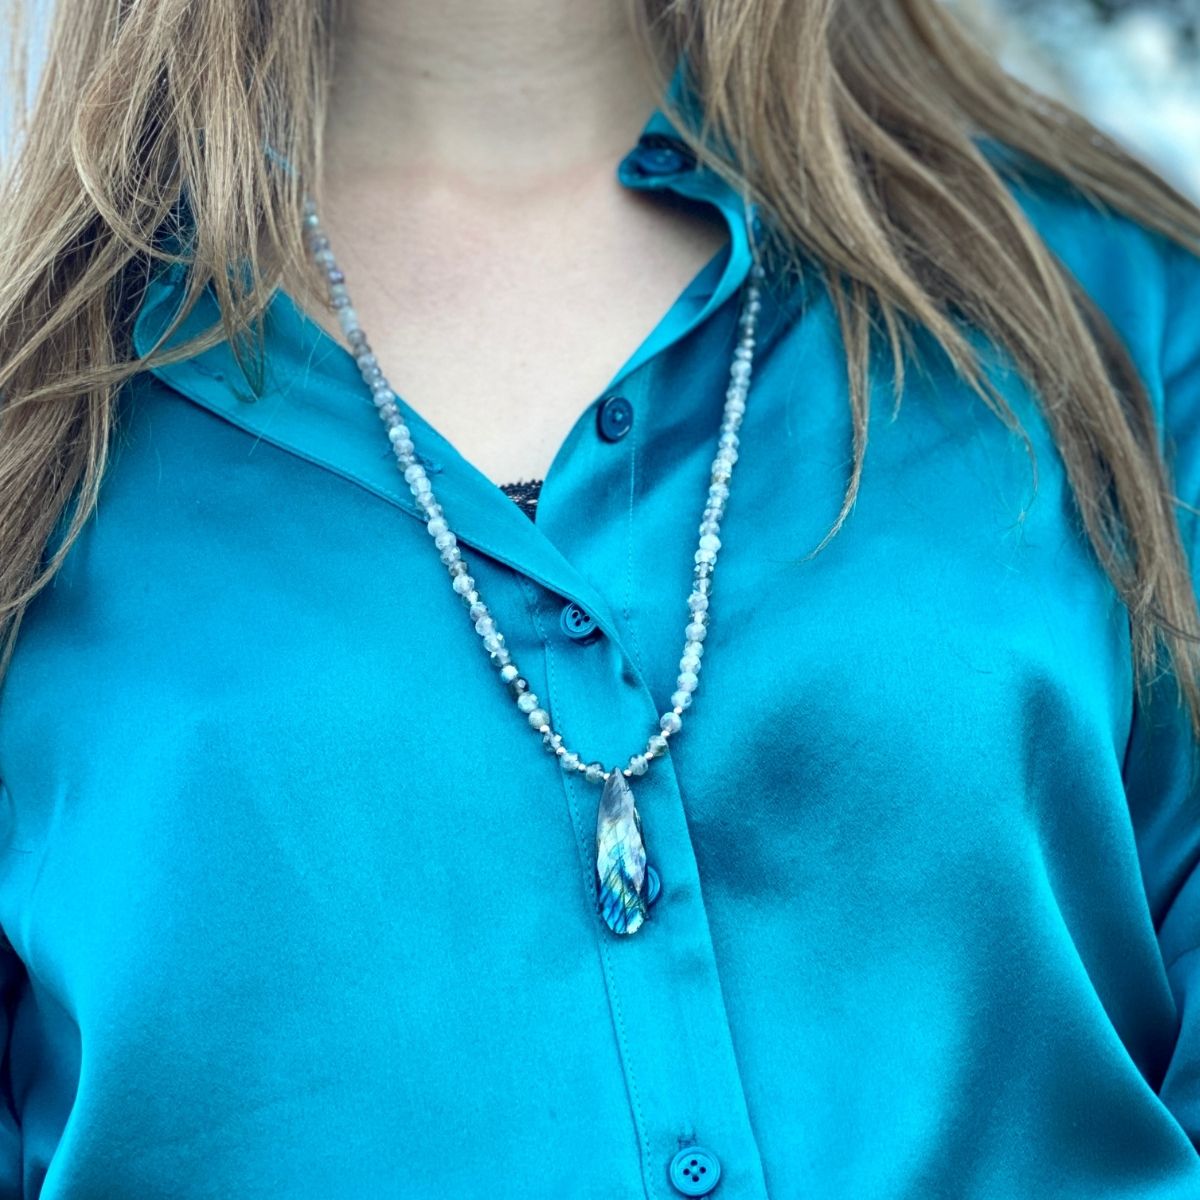 Labradorite Necklace to bring Positivity and Enthusiasm. Labradorite aides in bringing positivity and enthusiasm and boosts confidence in ones own abilities. Labradorite is also known for relieving insecurity, depression and anxiety.